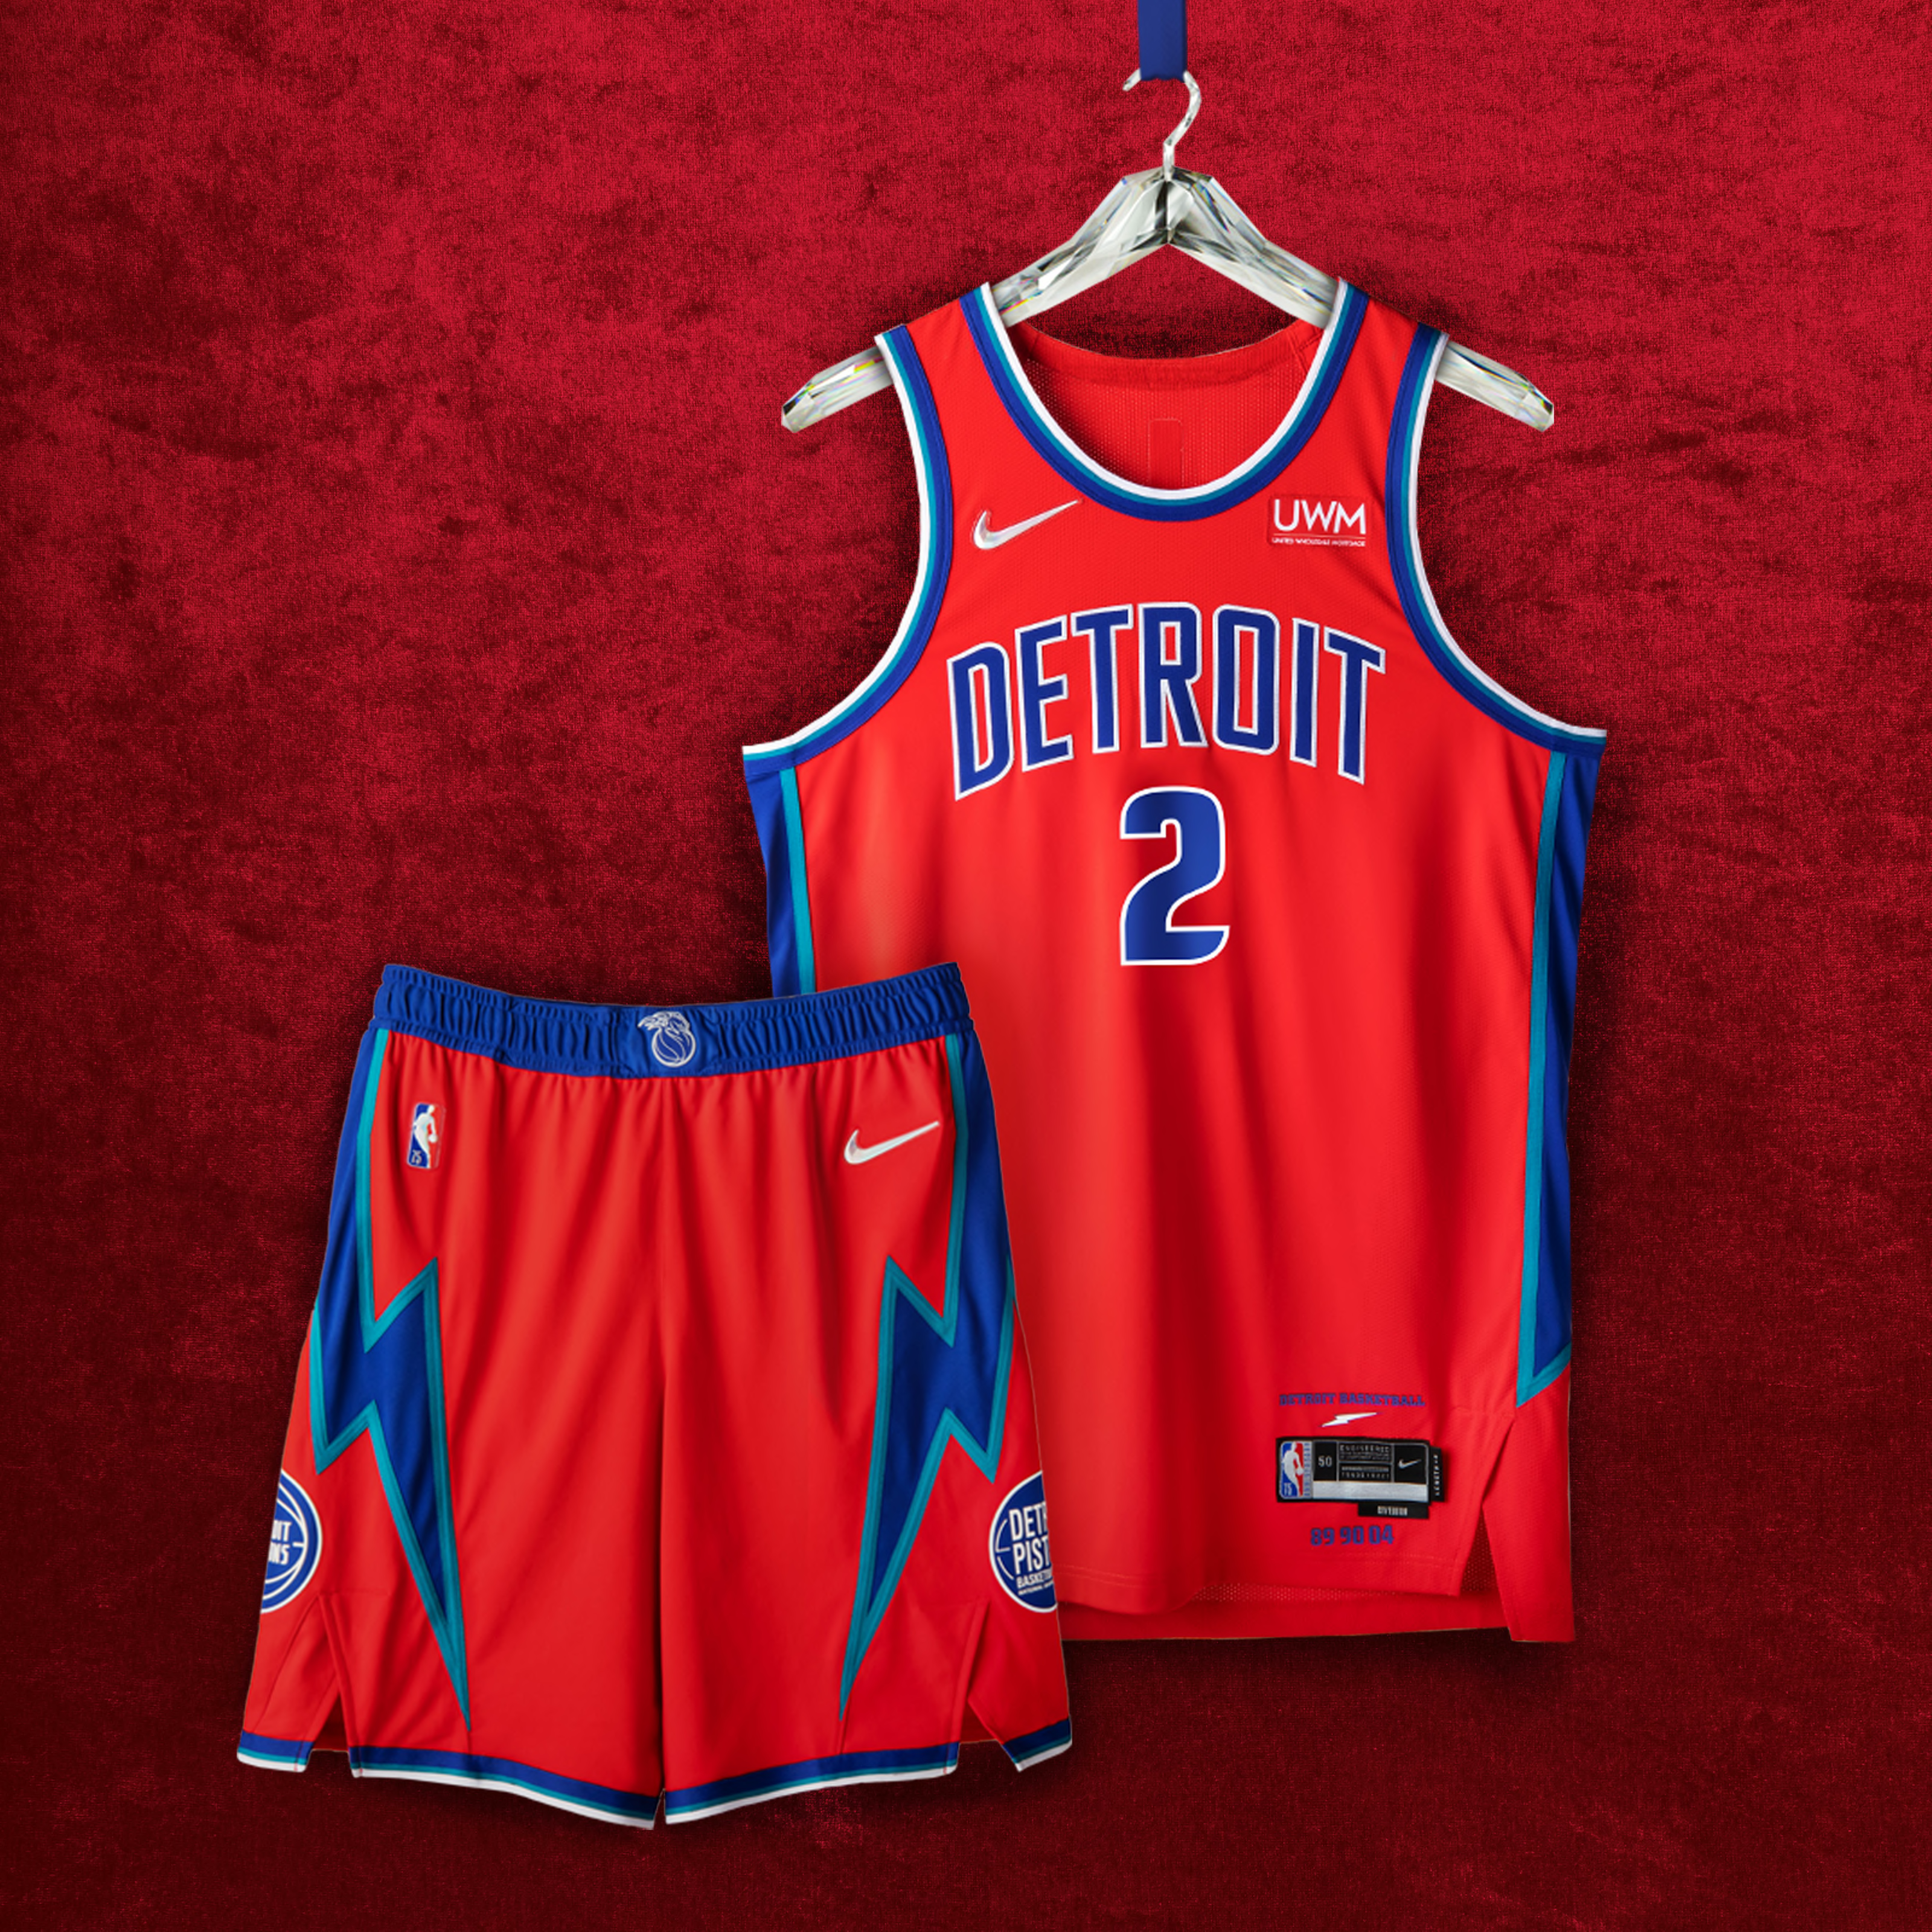 Order your Detroit Pistons Nike City Edition gear today